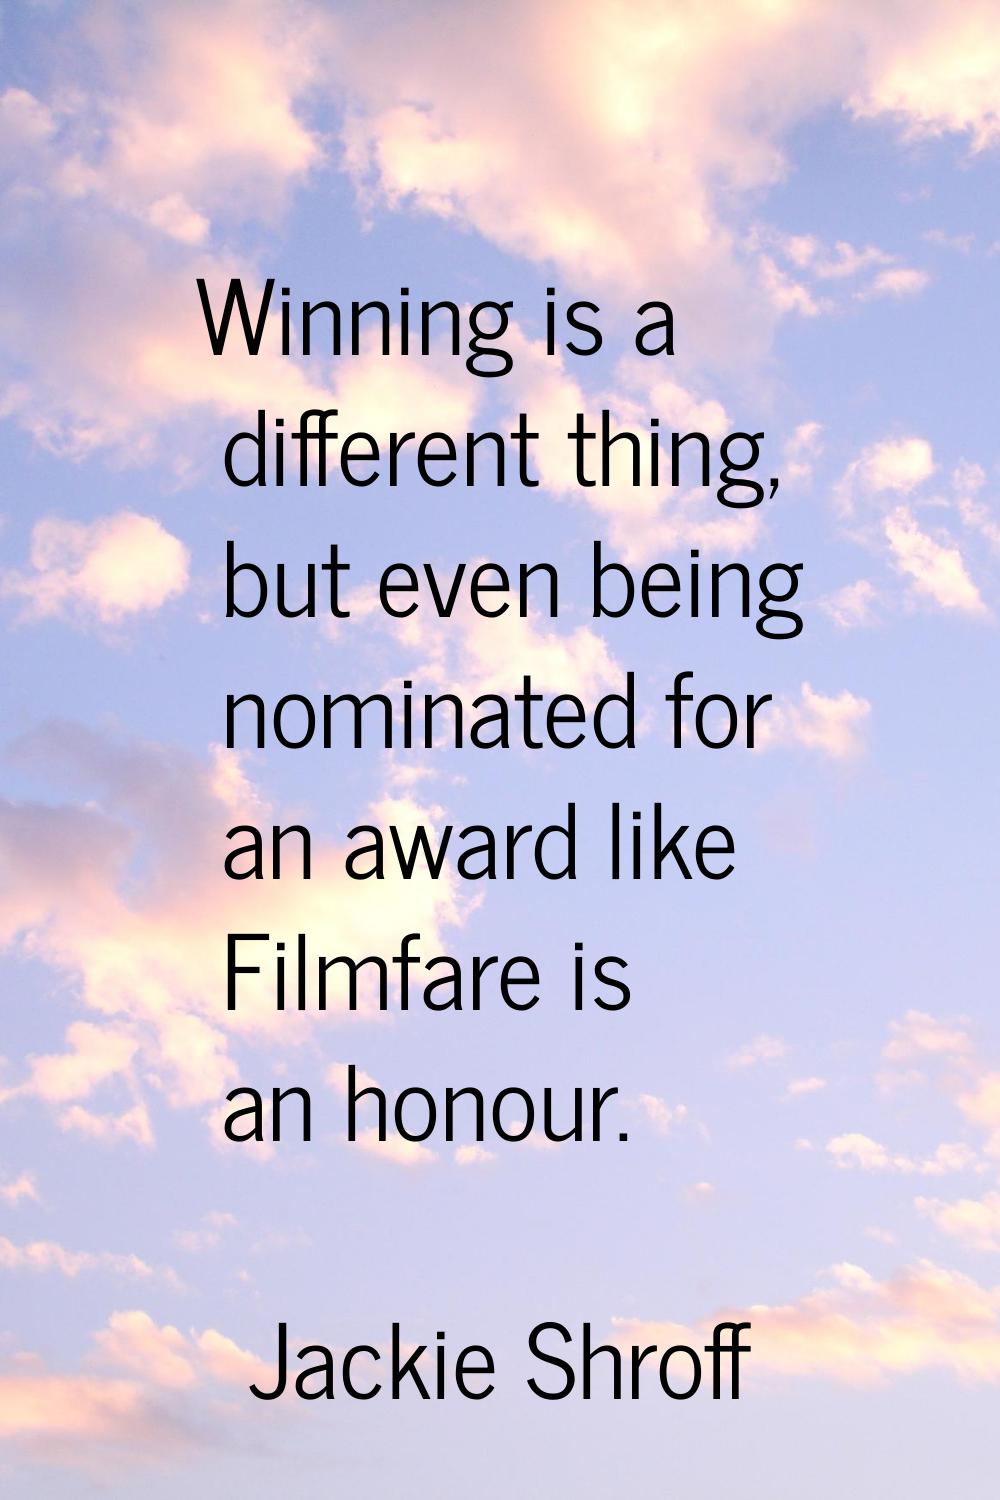 Winning is a different thing, but even being nominated for an award like Filmfare is an honour.